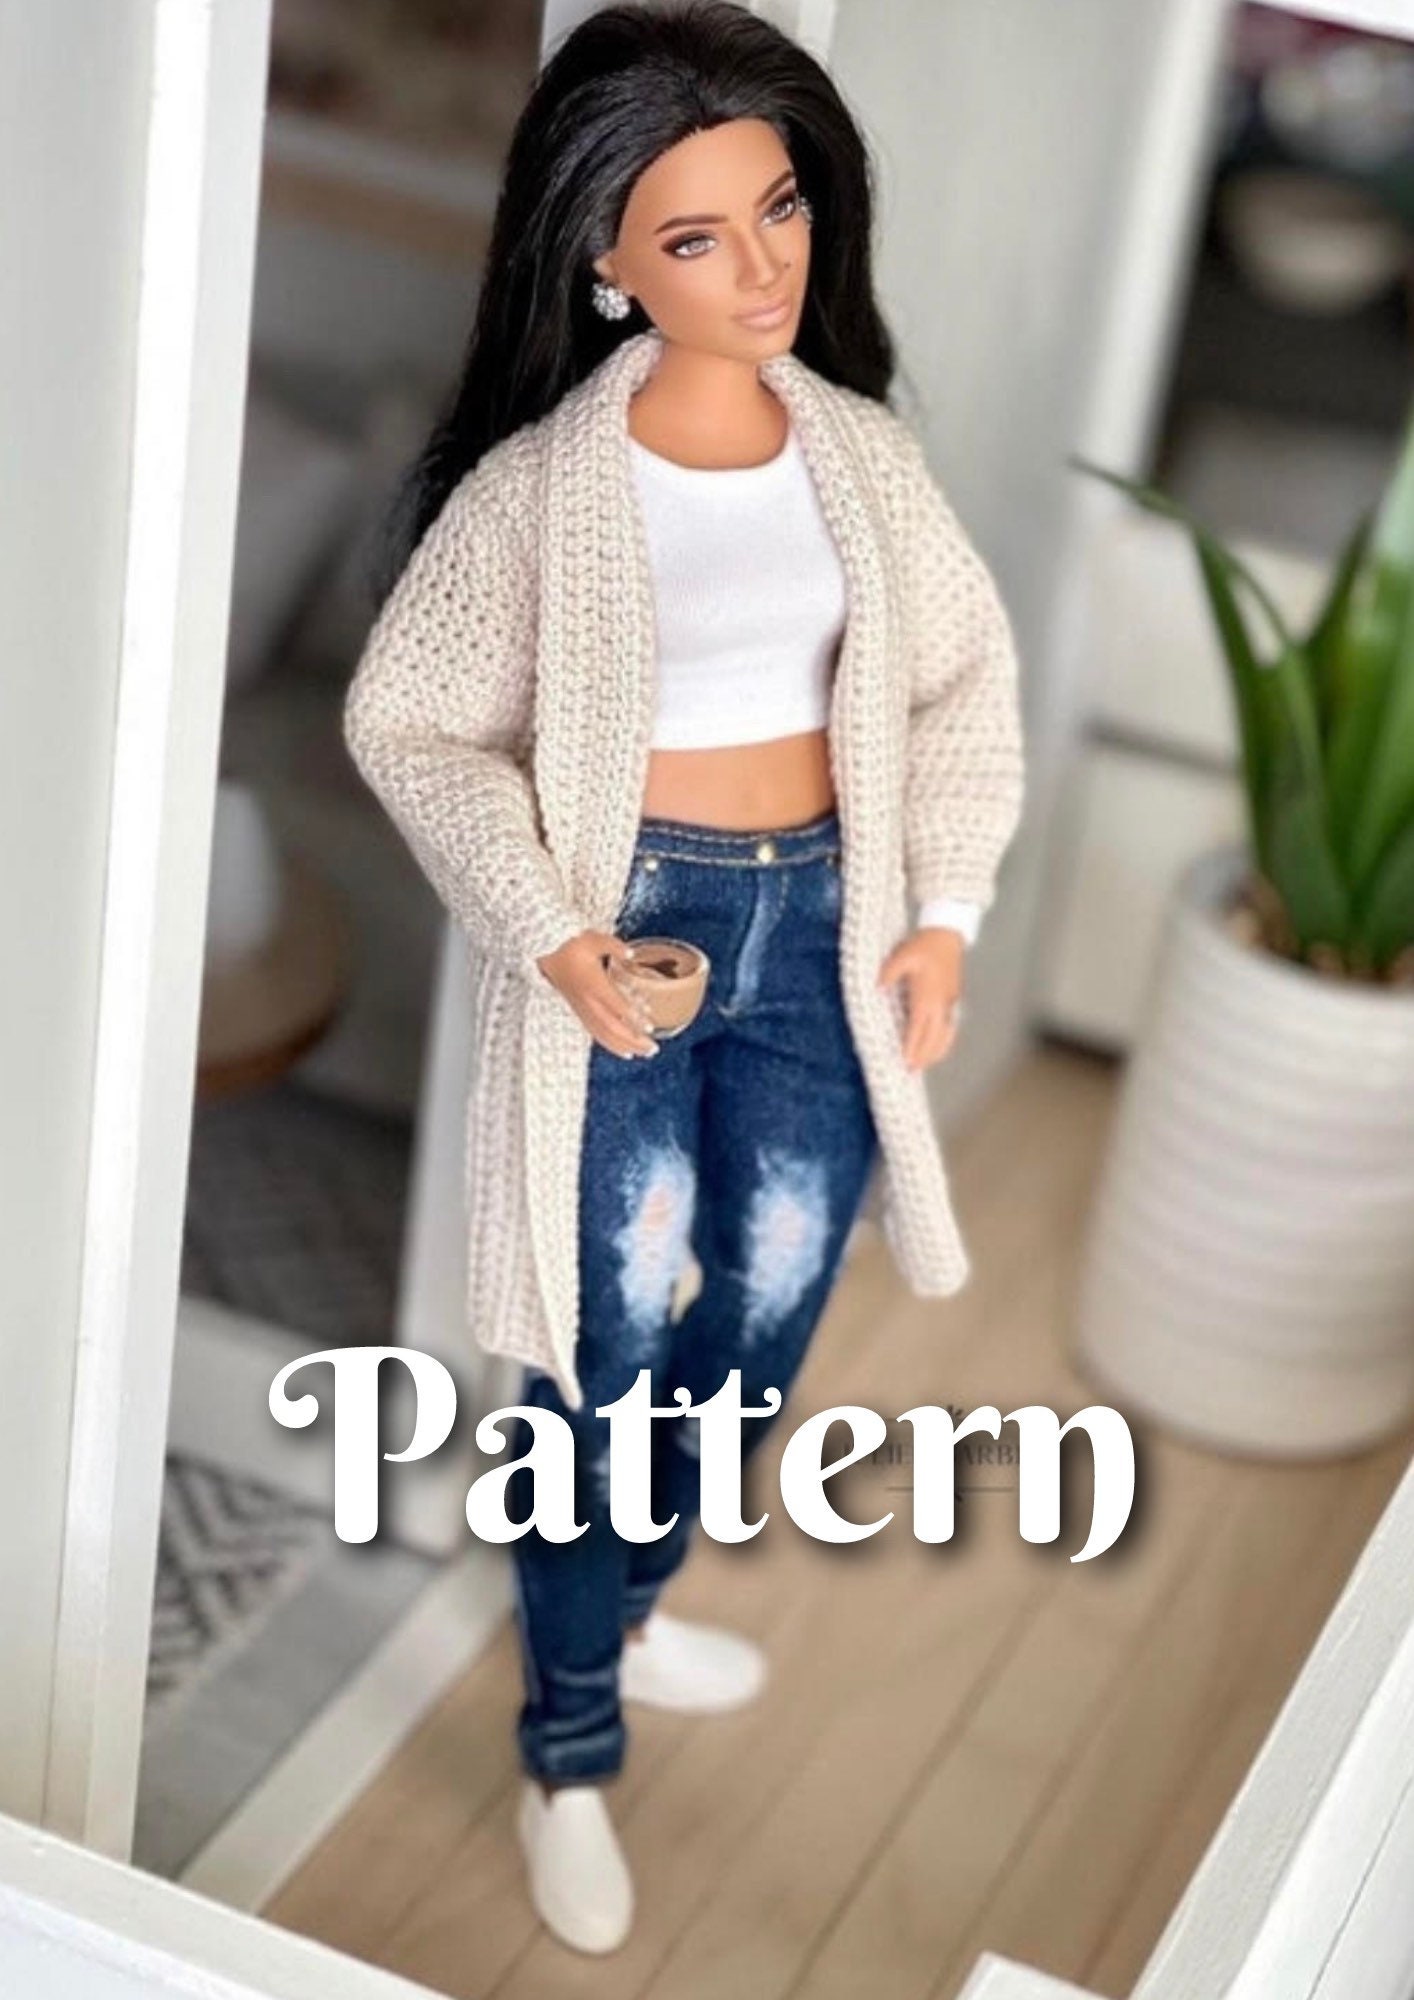 Barbie  Shop Haul! Realistic Doll Clothes & Accessories Review +  Christmas Doll Fashion! 